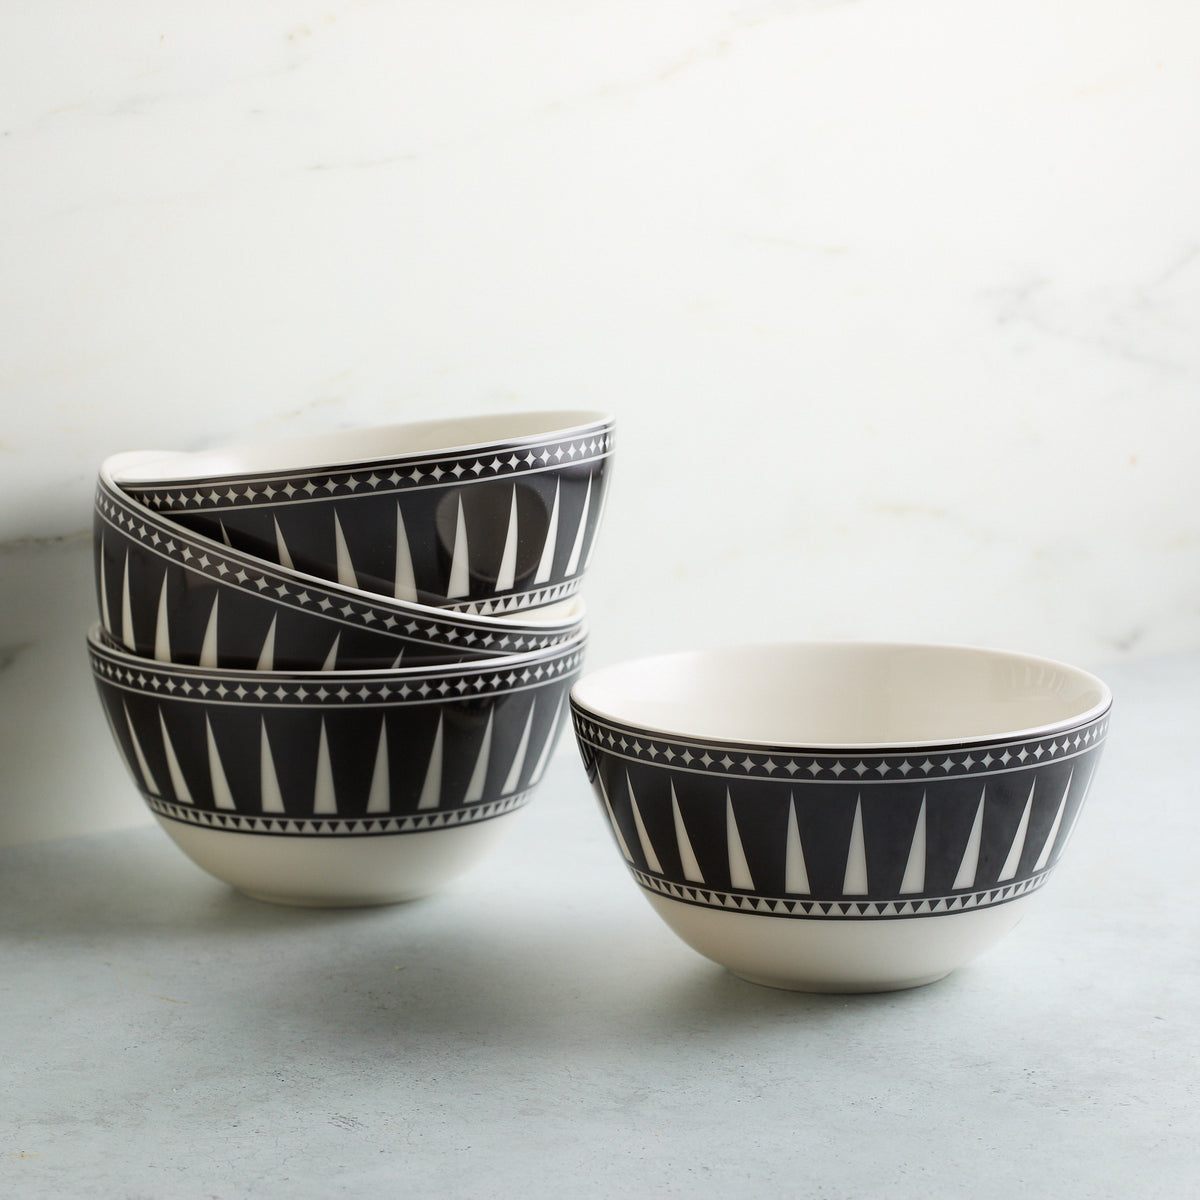 Four high-fired porcelain Marrakech Cereal Bowls by Caskata Artisanal Home with black and white geometric patterns are stacked on a light gray surface against a white background. These Marrakech-inspired bowls offer a touch of exotic elegance to your dining experience.